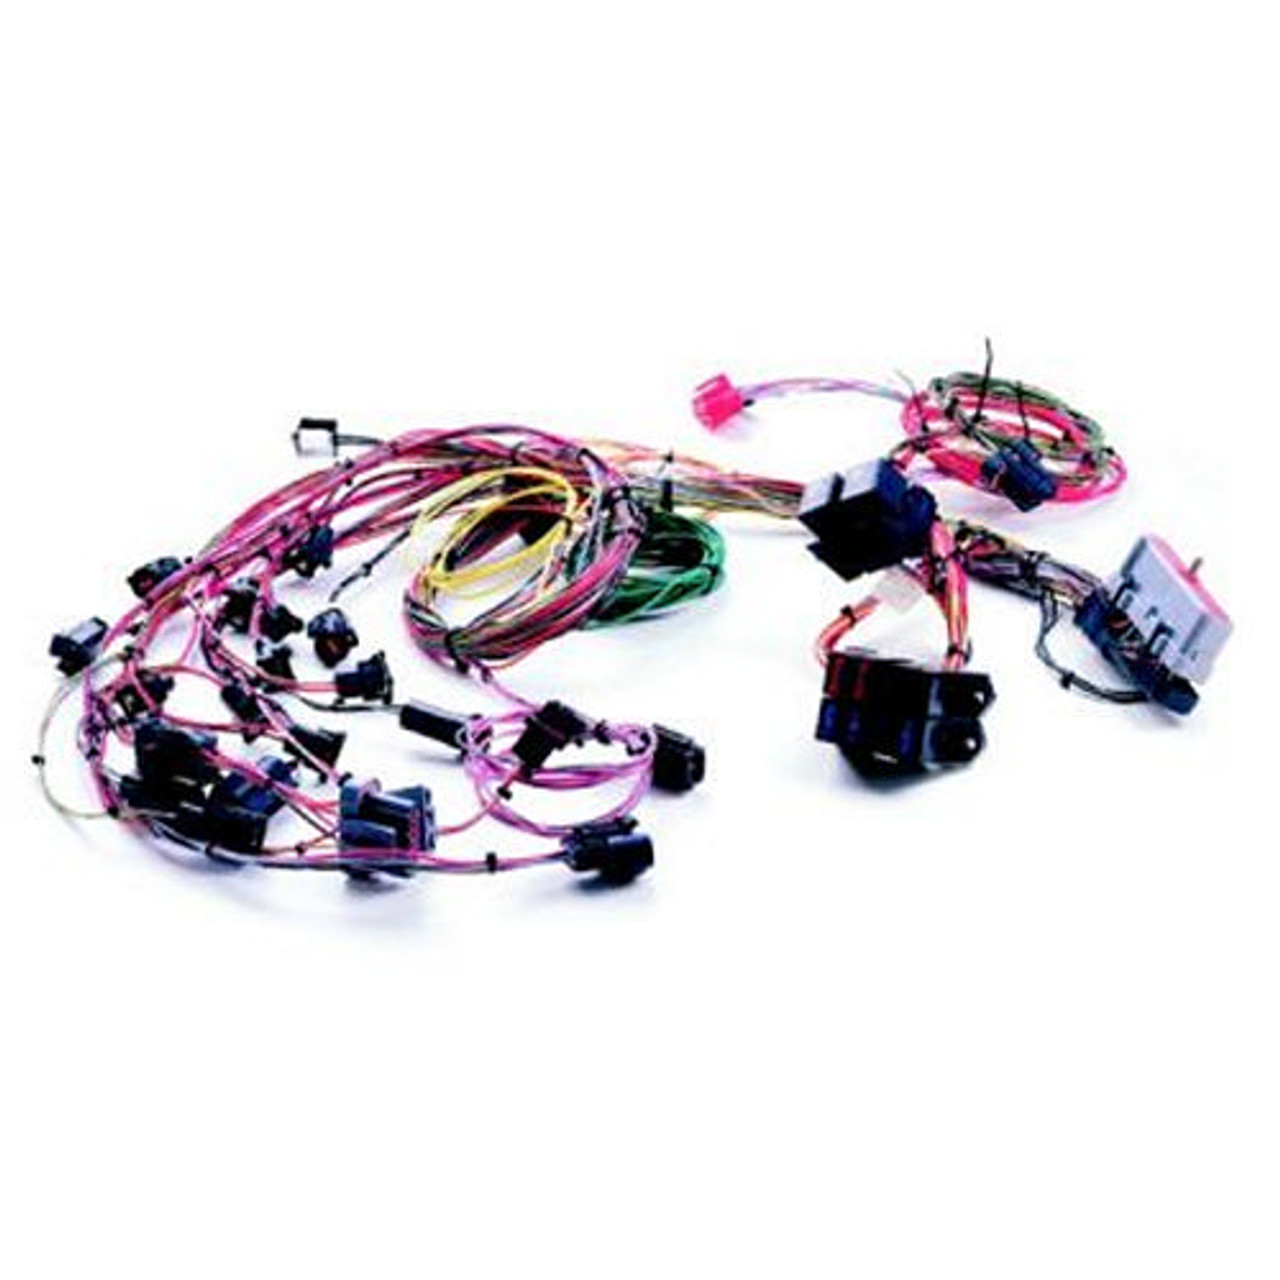 Painless 86-95 Ford 5.0L Mustang EFI Wiring Harness - PWI60510